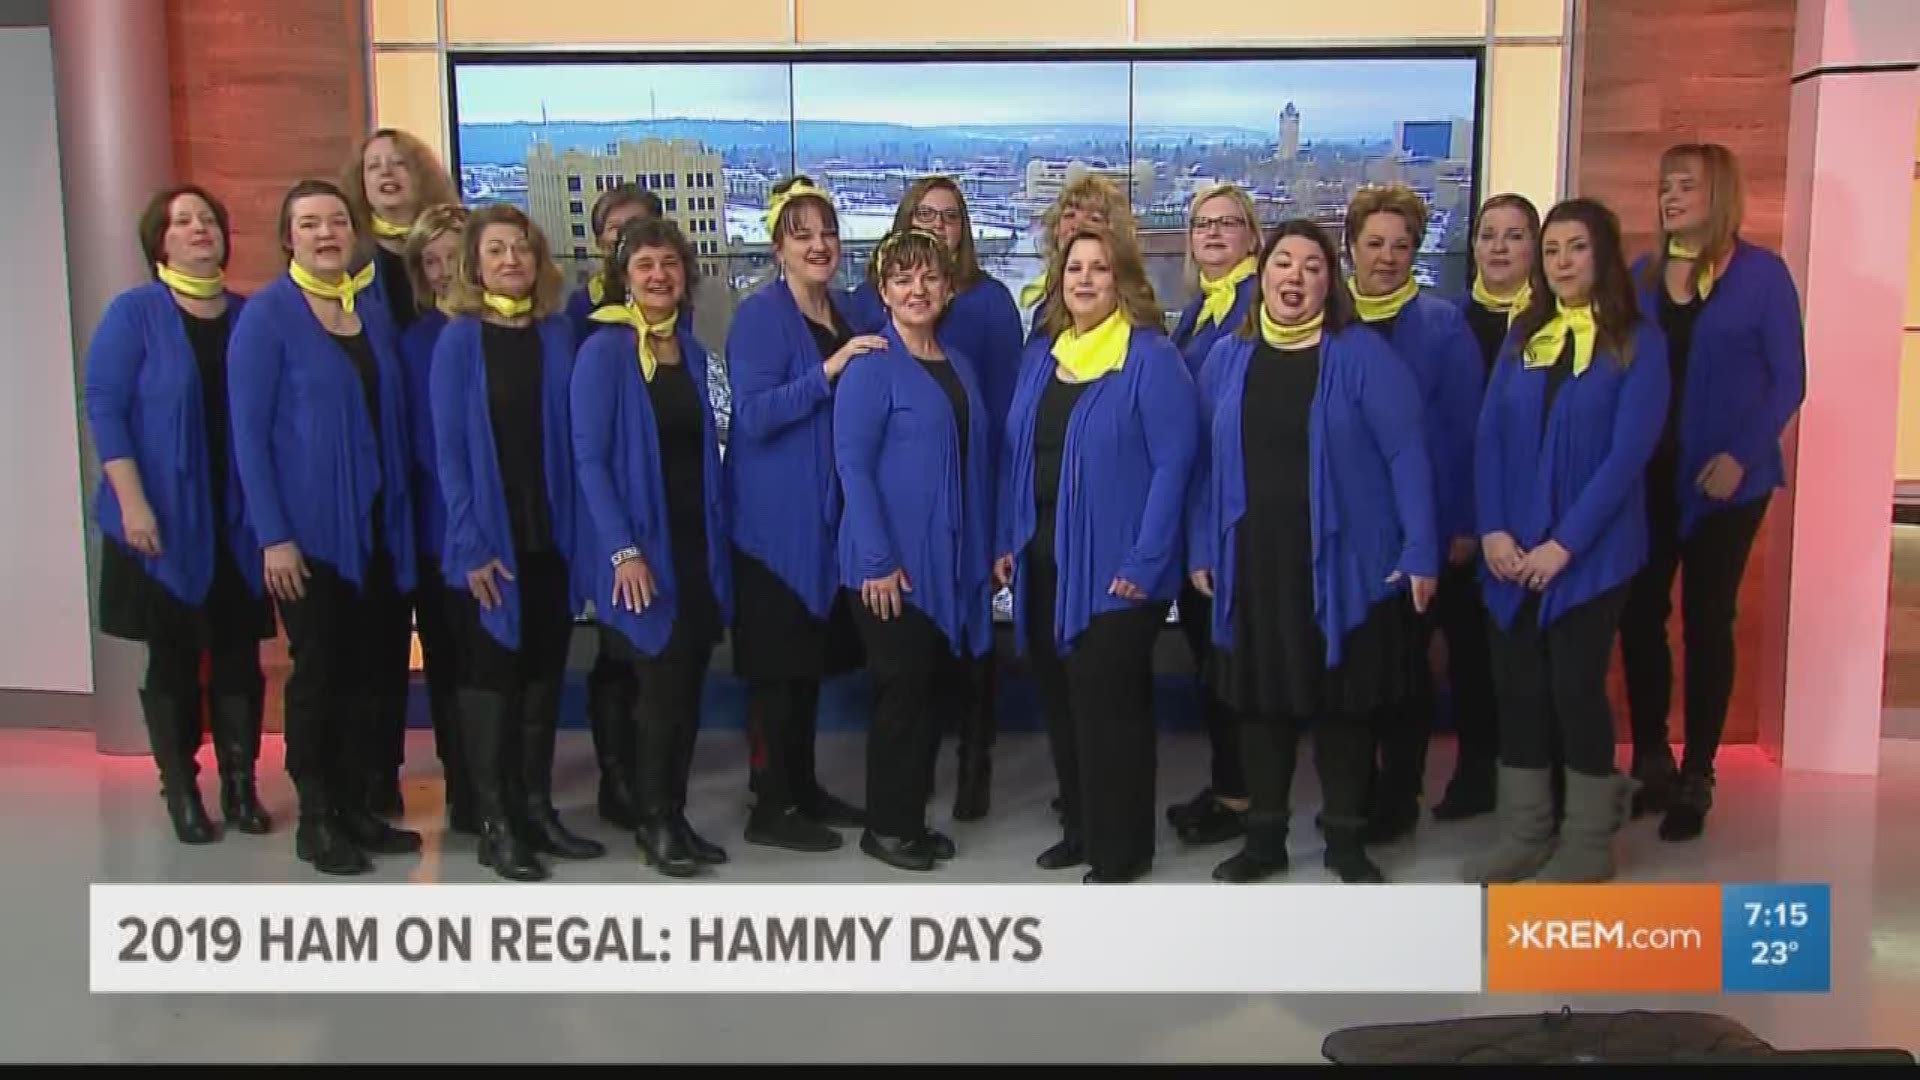 KREM's Jen York and Evan Noorani sit down with the annual fundraiser's organizers to discuss the event, and get a sneak preview of the performances.